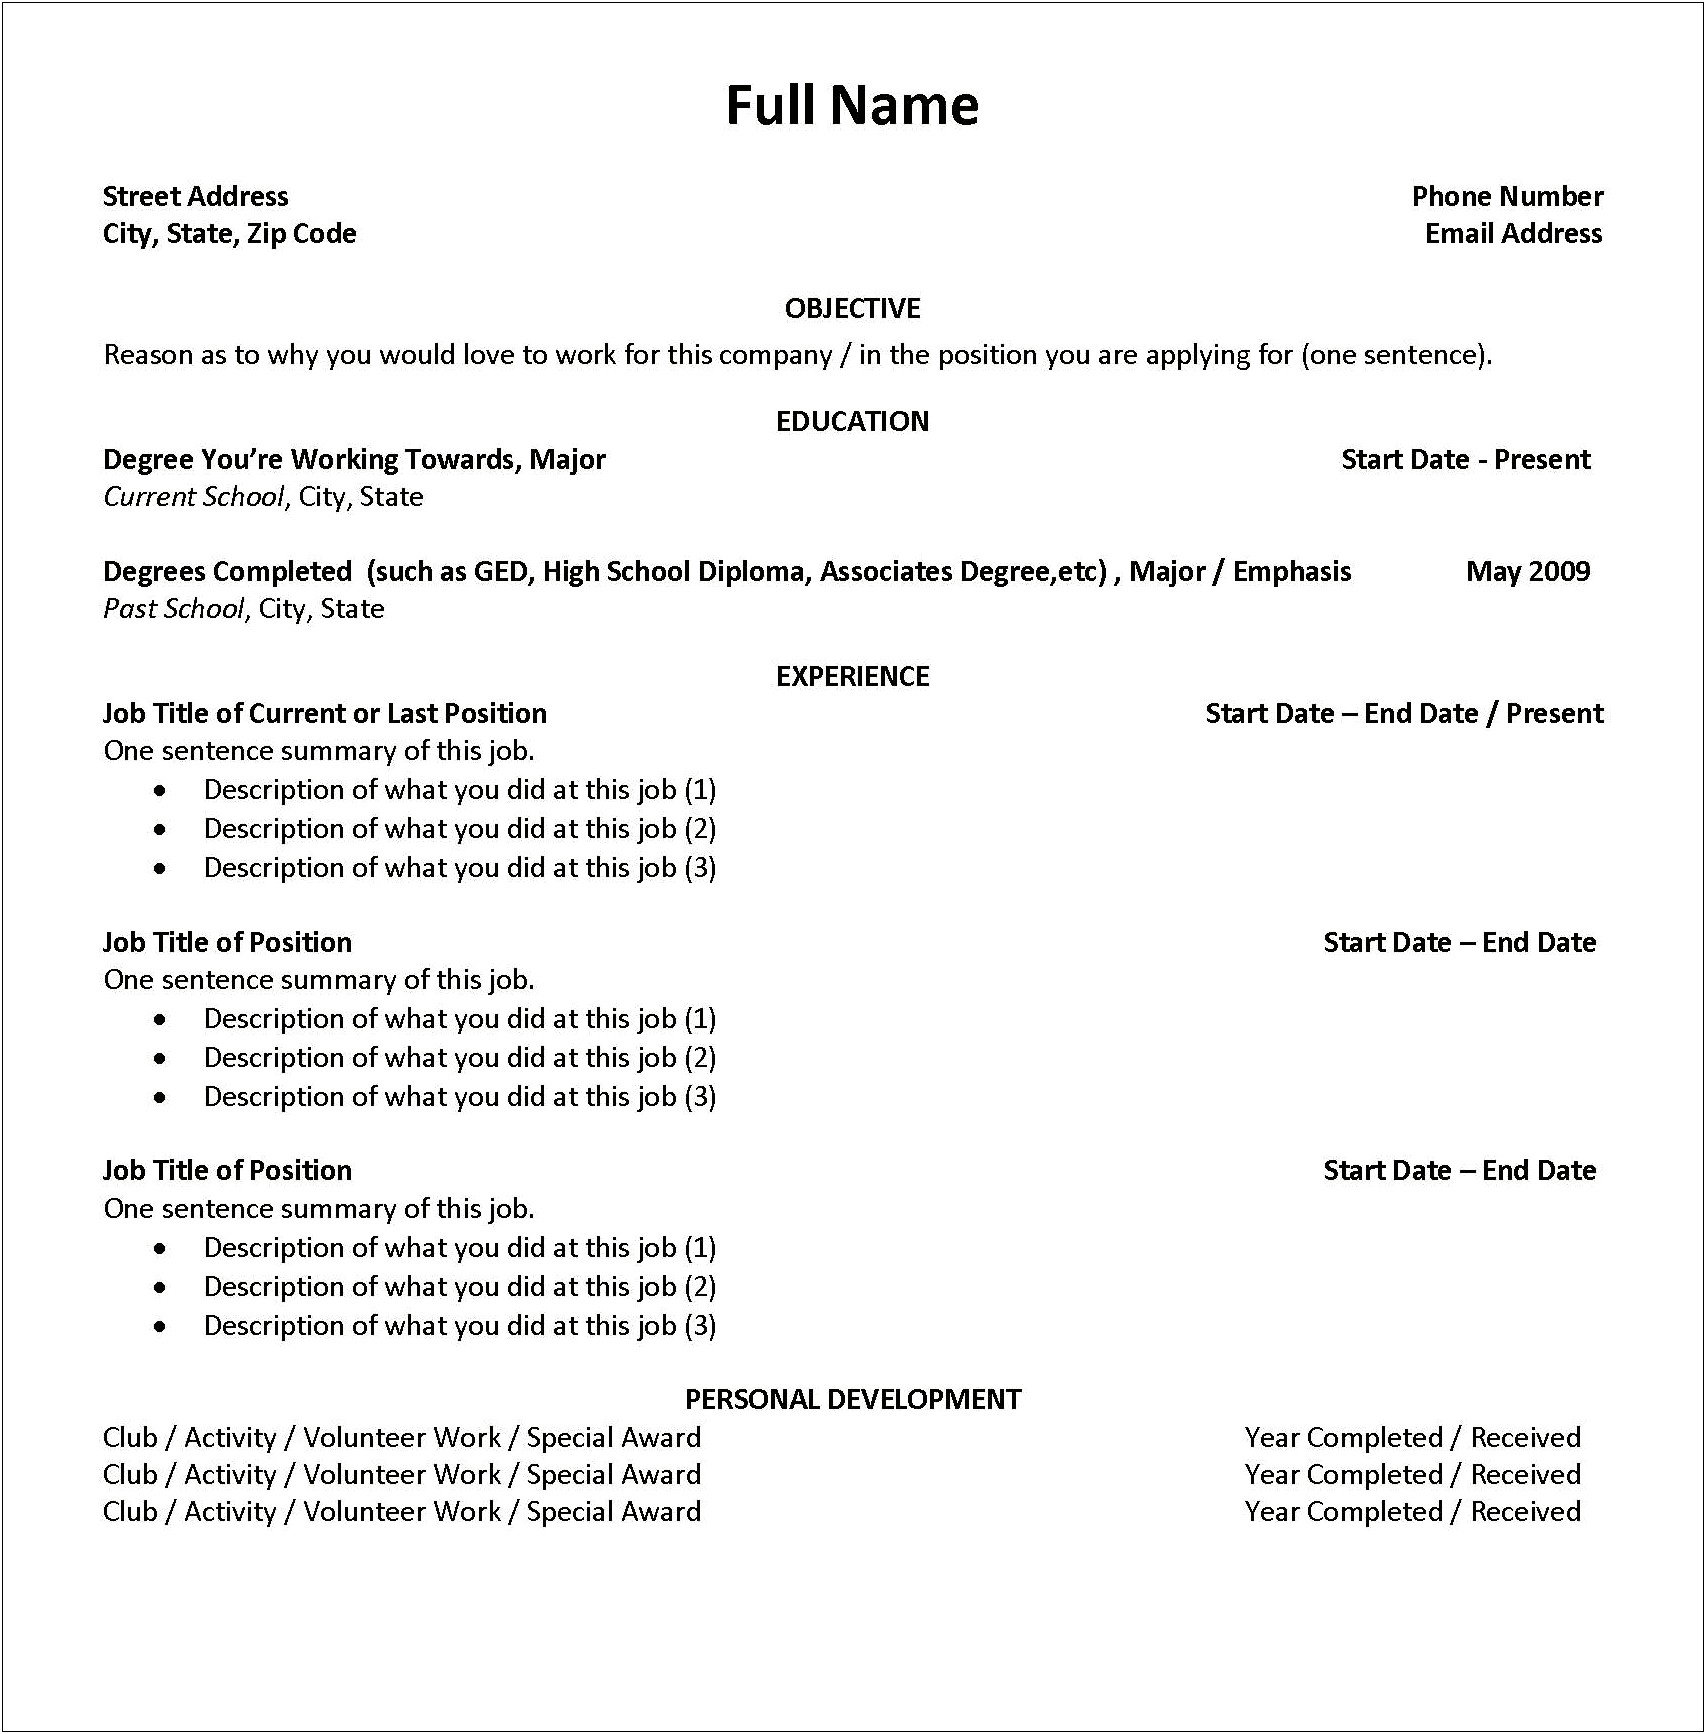 Sample Resumes For College Students Summer Job